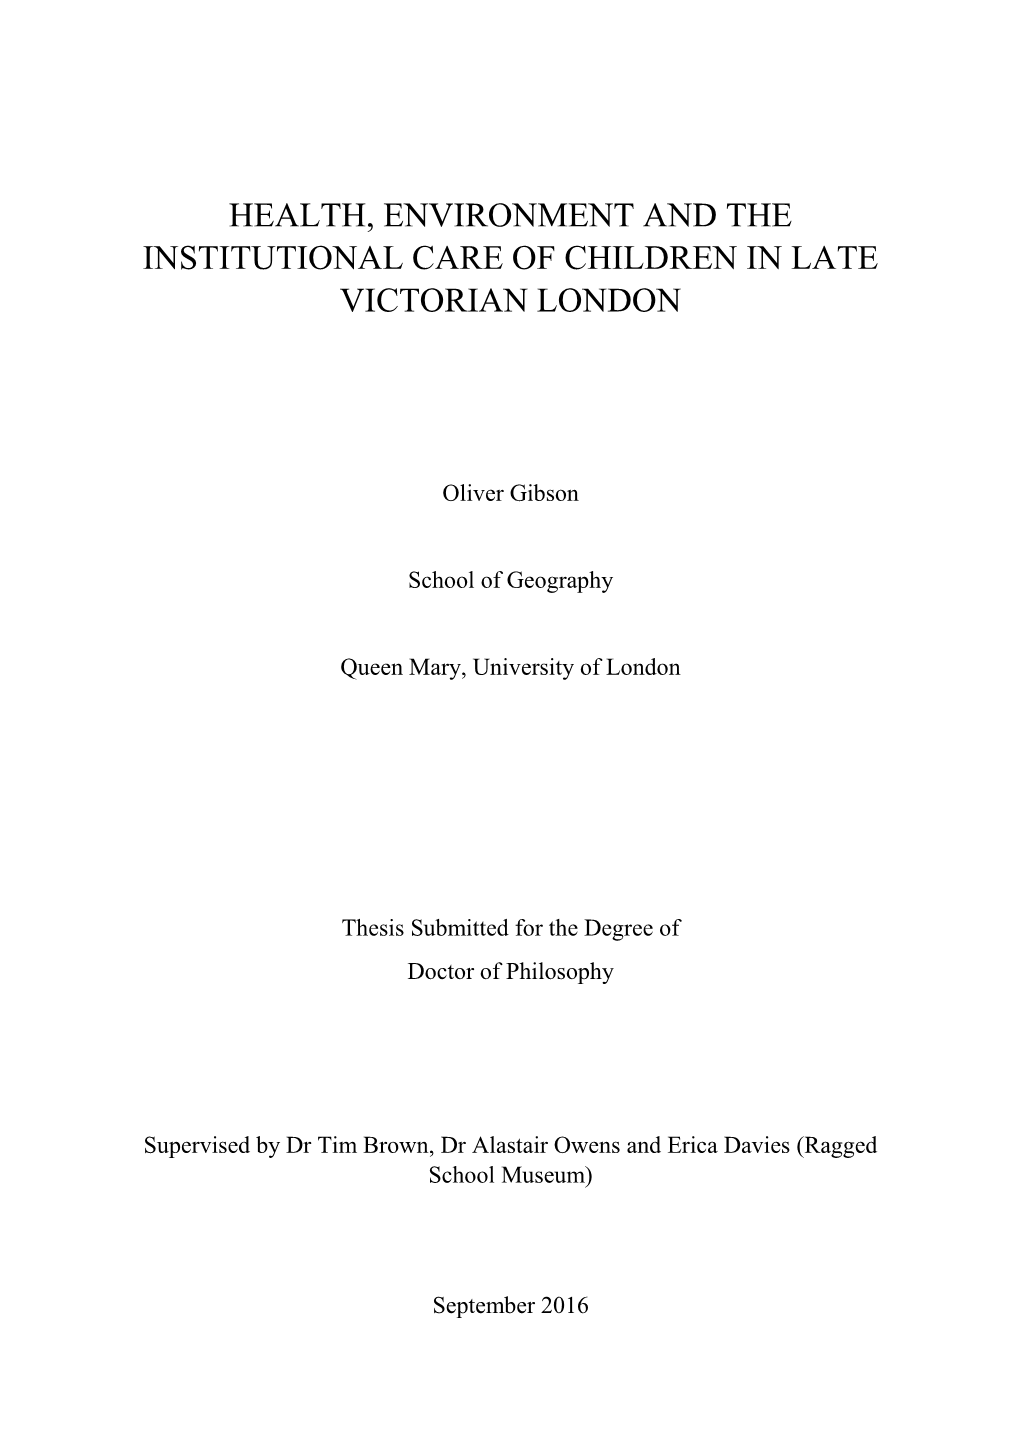 Health, Environment and the Institutional Care of Children in Late Victorian London